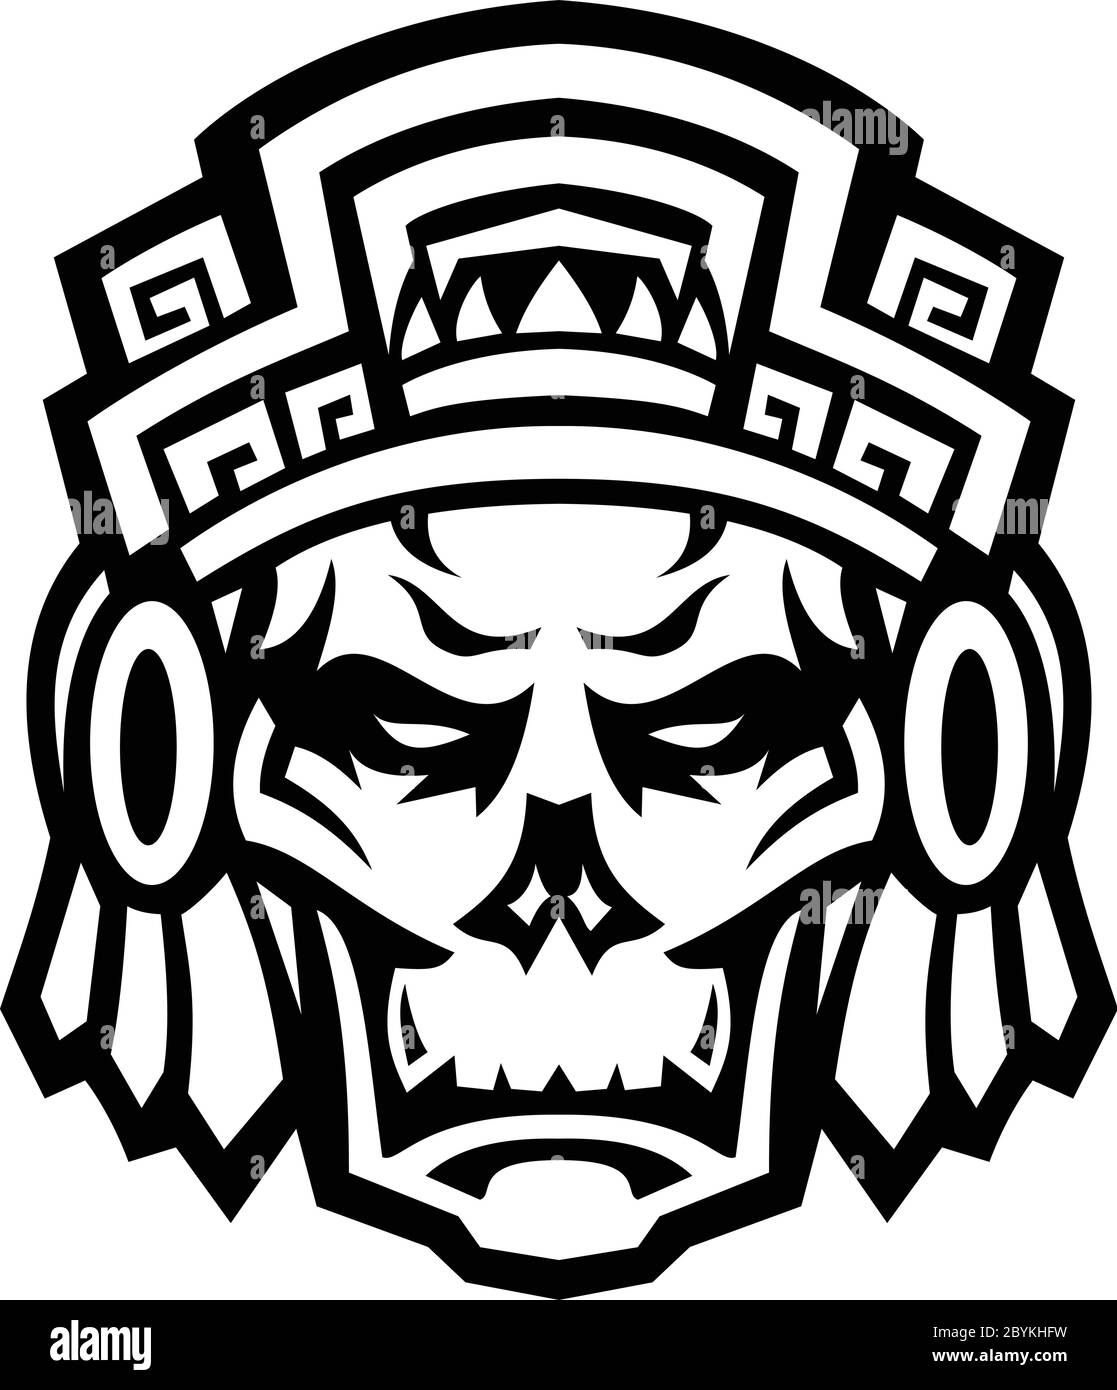 Mascot icon illustration of a skull of a noble Aztec warrior wearing wood helmet or headdress viewed front on isolated background in retro black and w Stock Vector